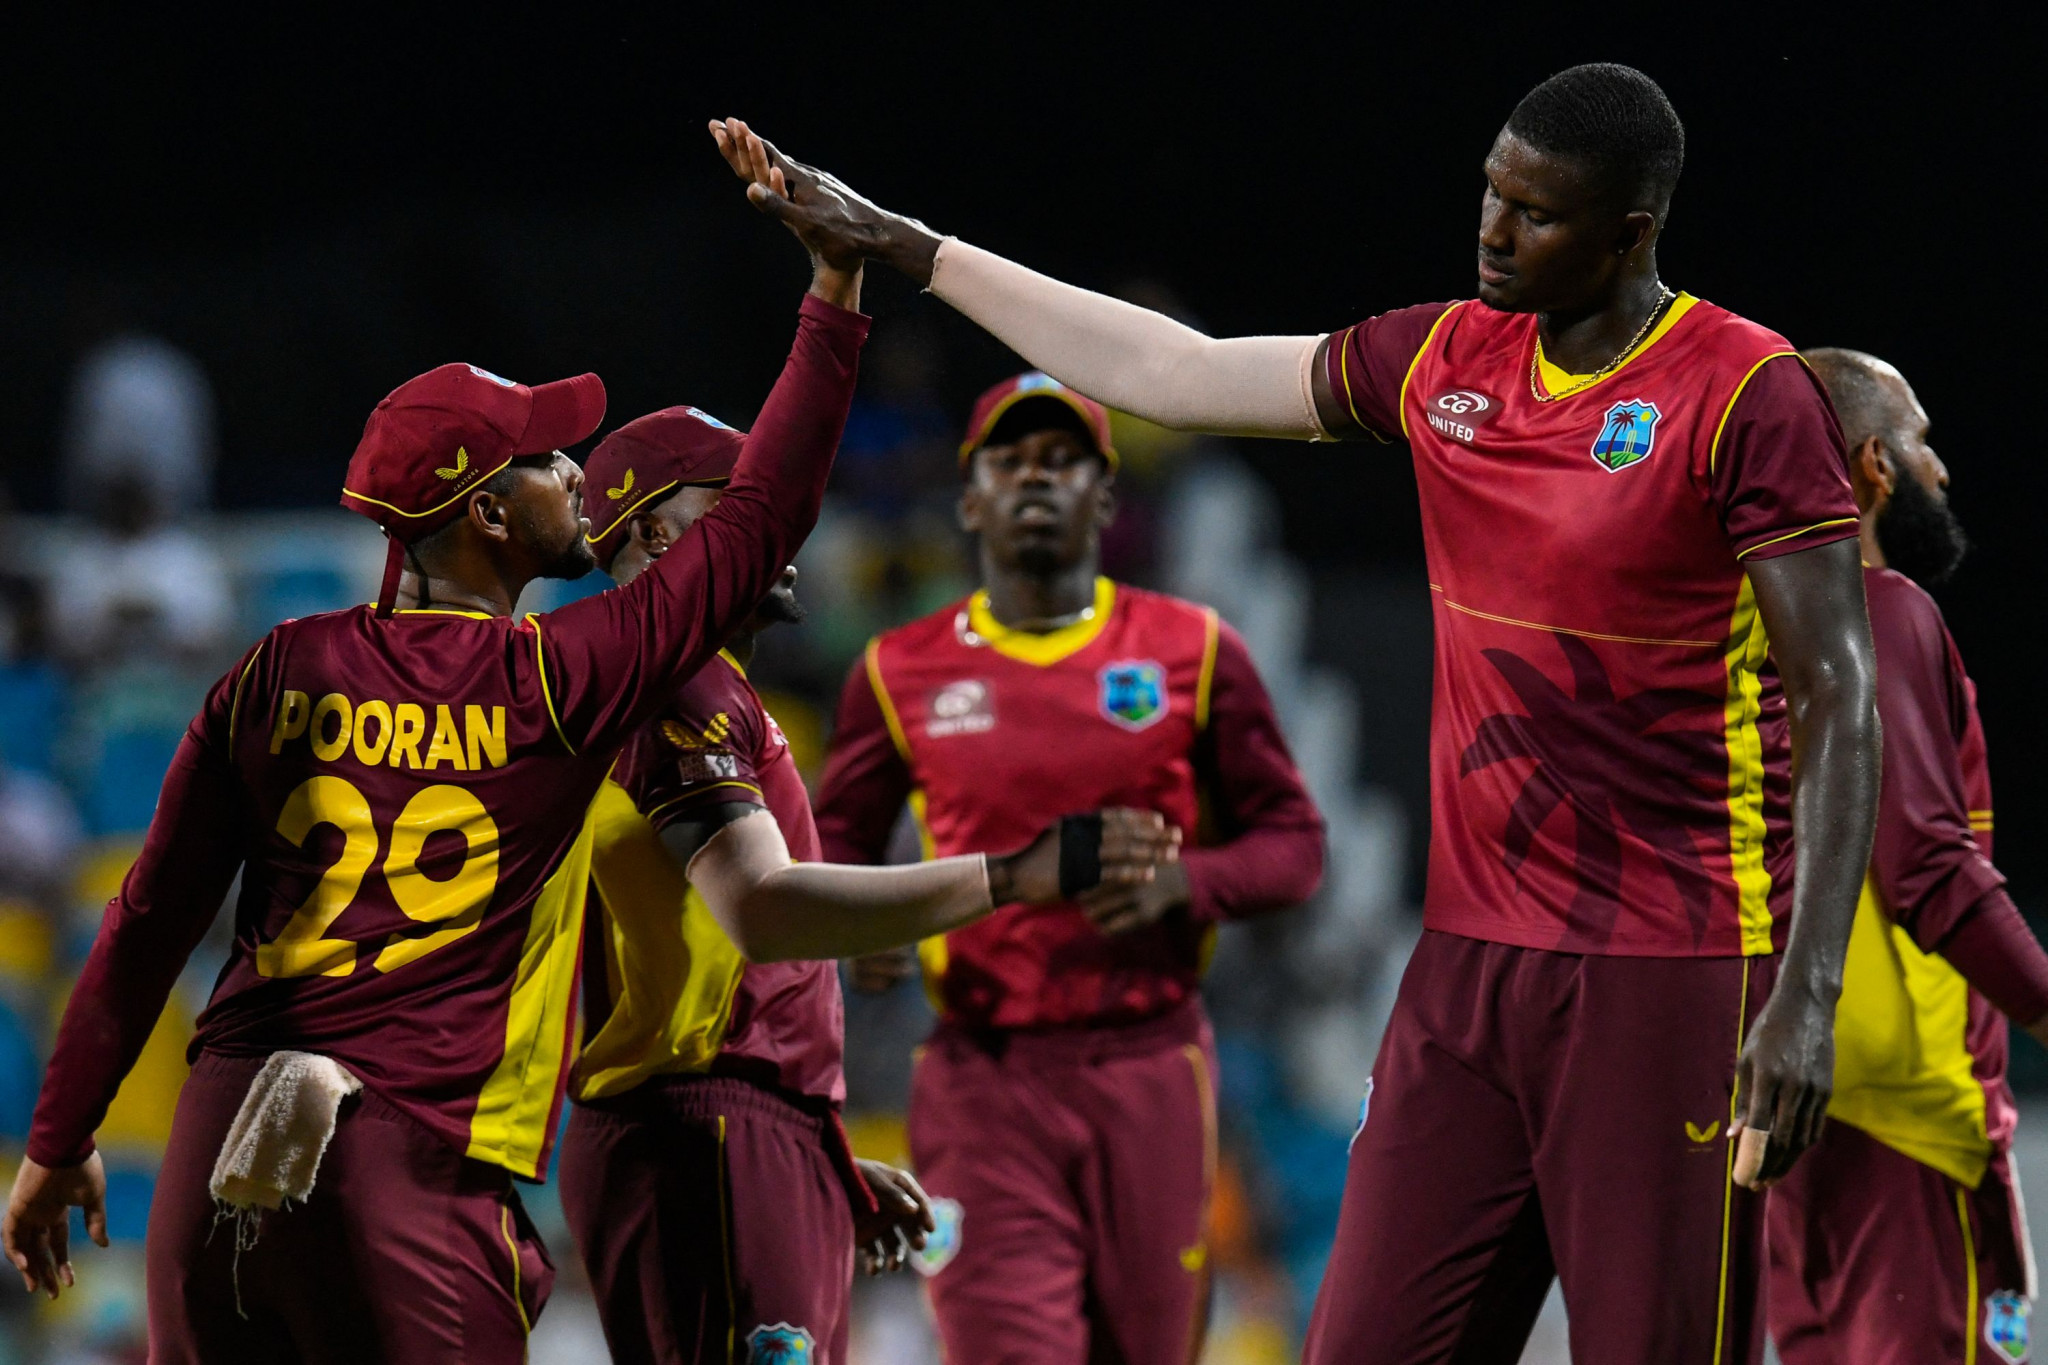 The West Indies lost to Ireland and Scotland to be eliminated  ©Getty Images